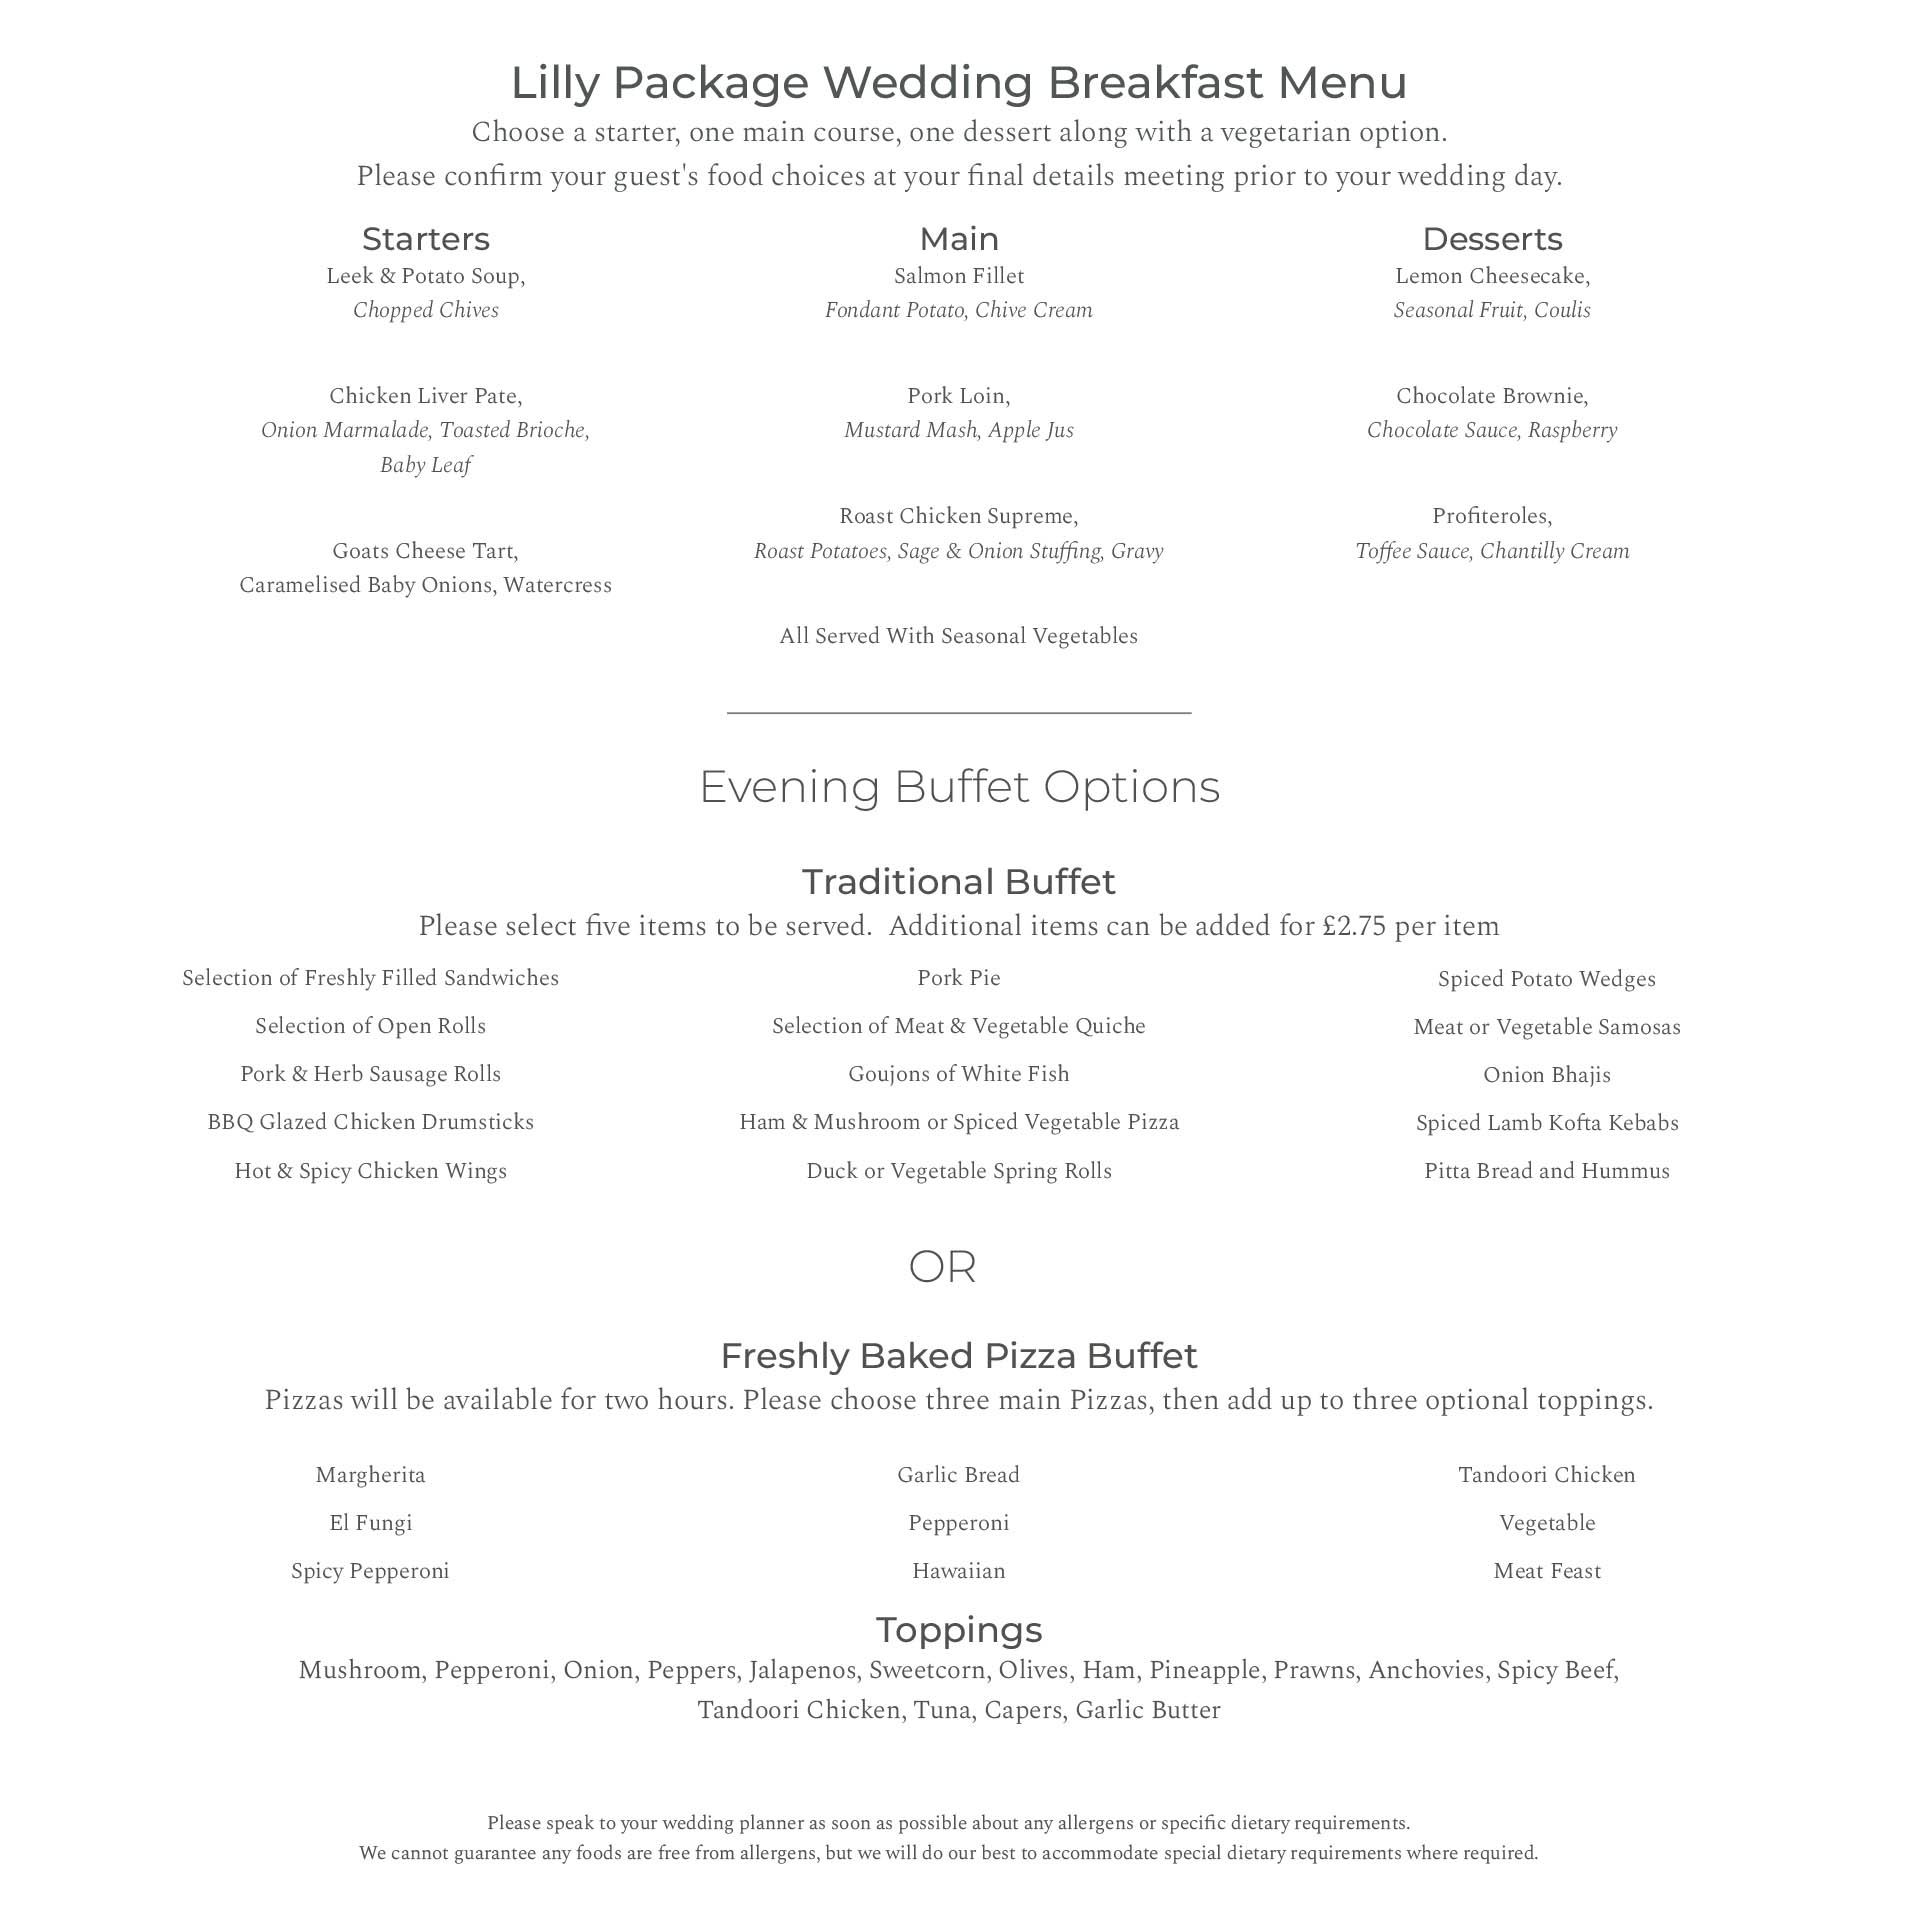 Lilly Package Menu Bredbury Hall Wedding Venue in Stockport Cheshire